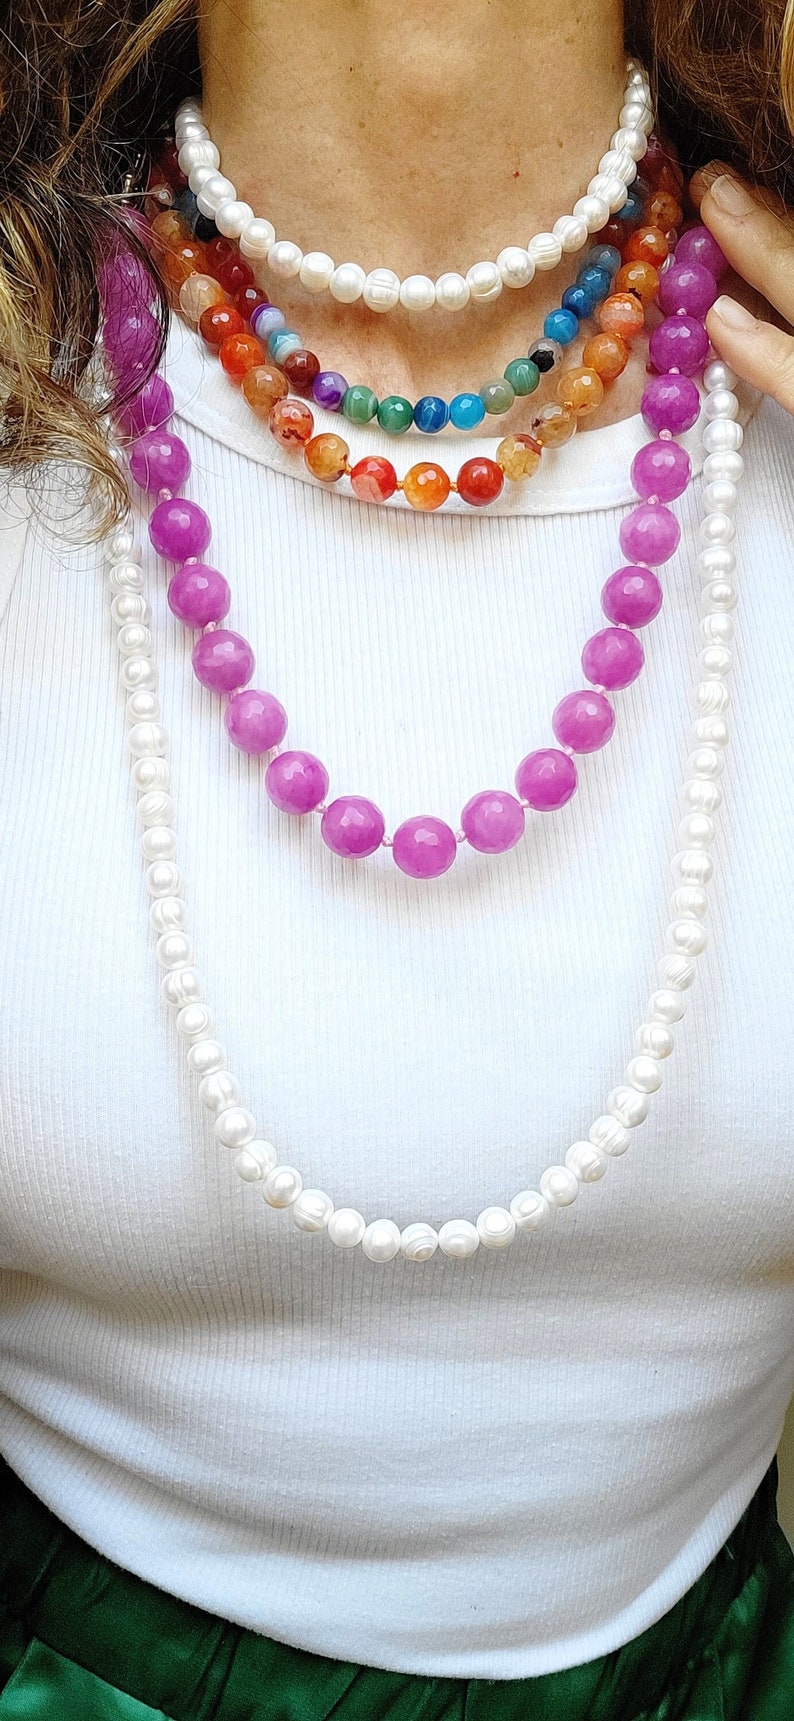 Pink agates necklace for women, necklace with precious natural stone beads, women's jewelry for weddings and communions, handmade jewelry image 1